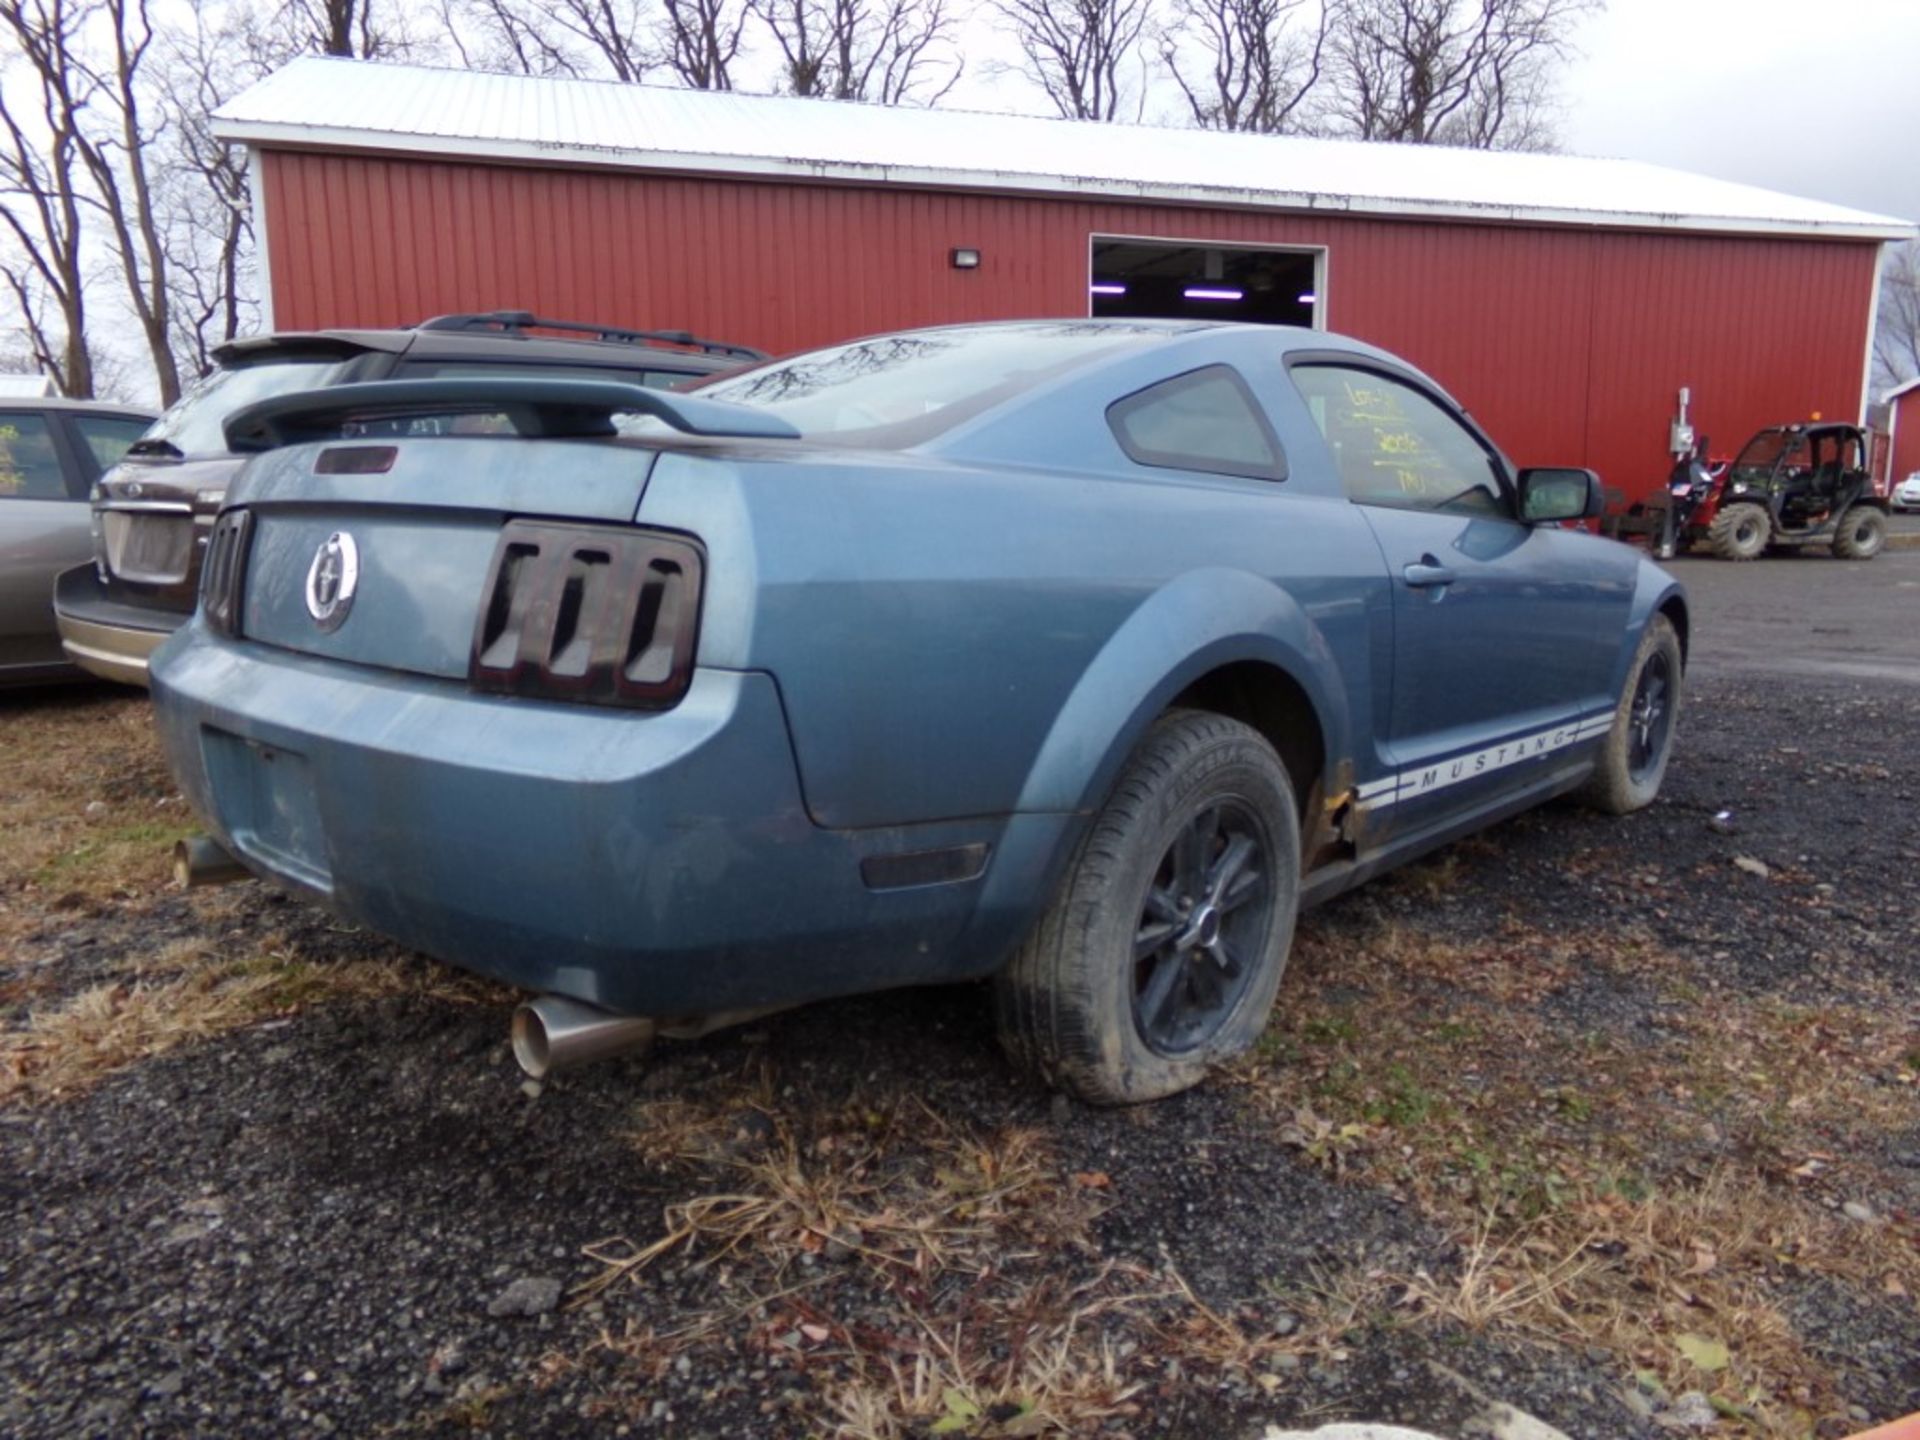 2006 Ford Mustang V6, Blue, 159,627 Mi., VIN#:1ZVFT80N965225795 - OPEN TO ALL BUYERS, RUNS & - Image 3 of 9